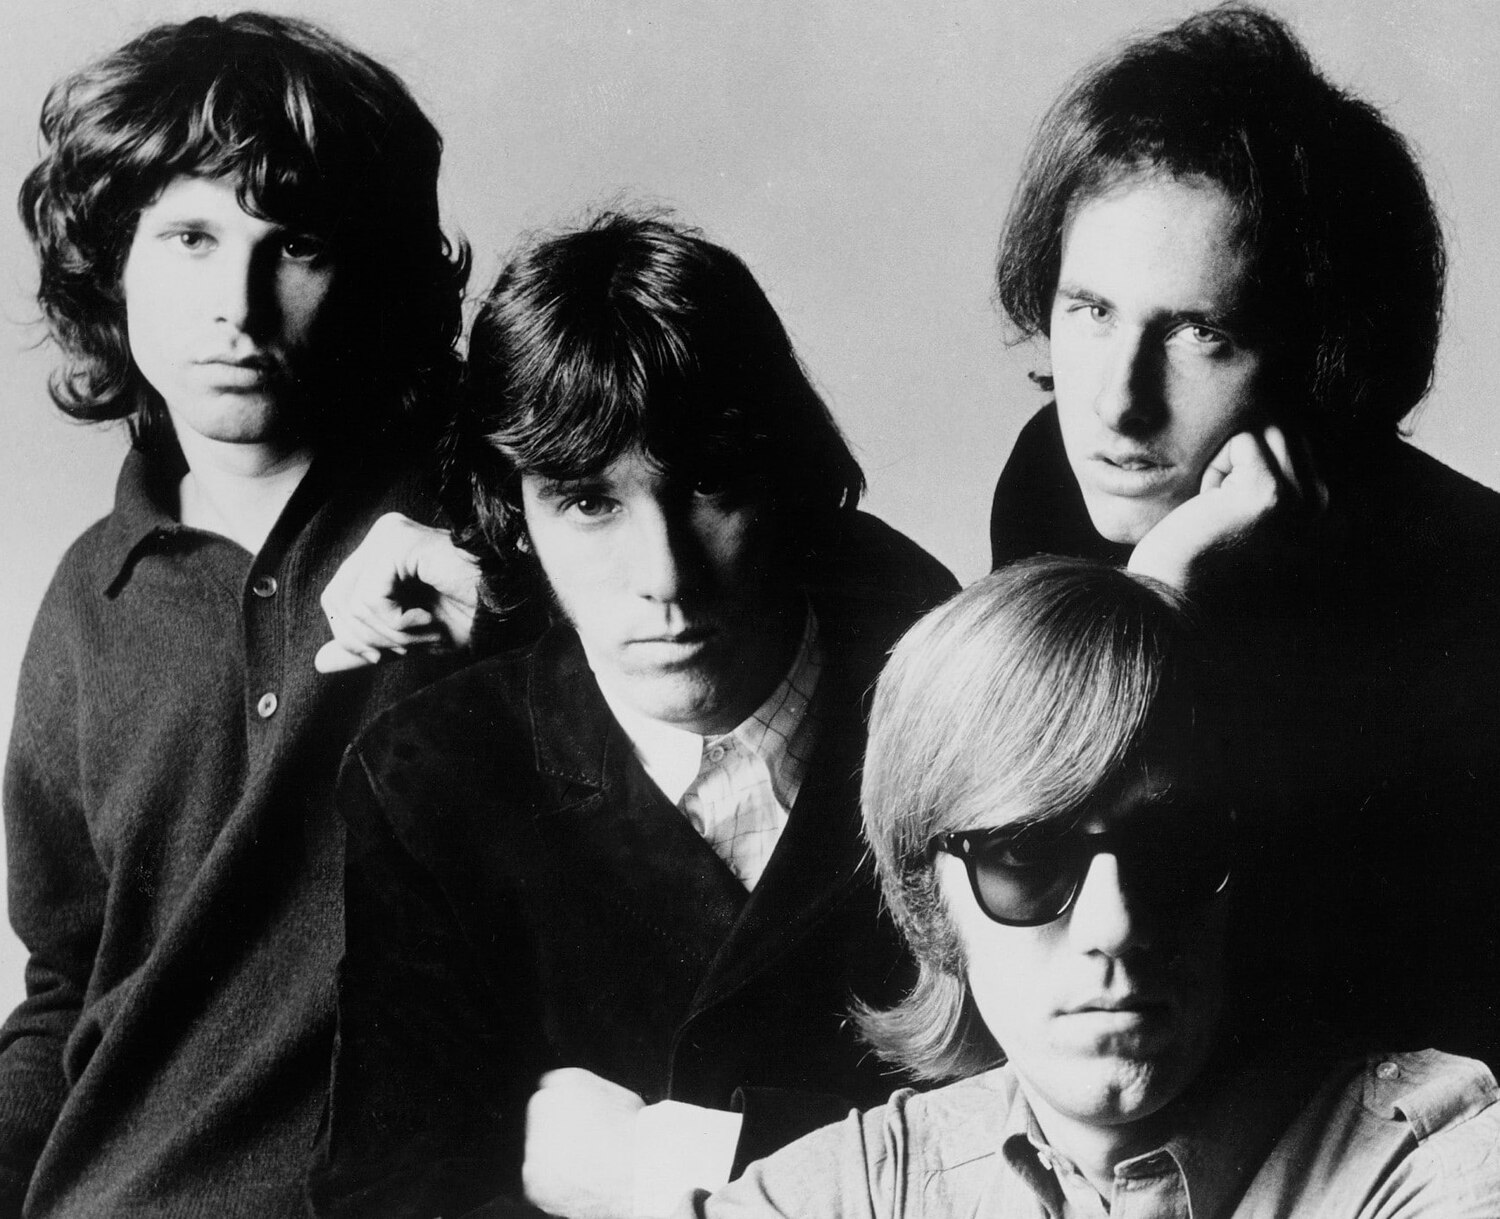 Stoned Immaculate: The Music of The Doors - Wikipedia